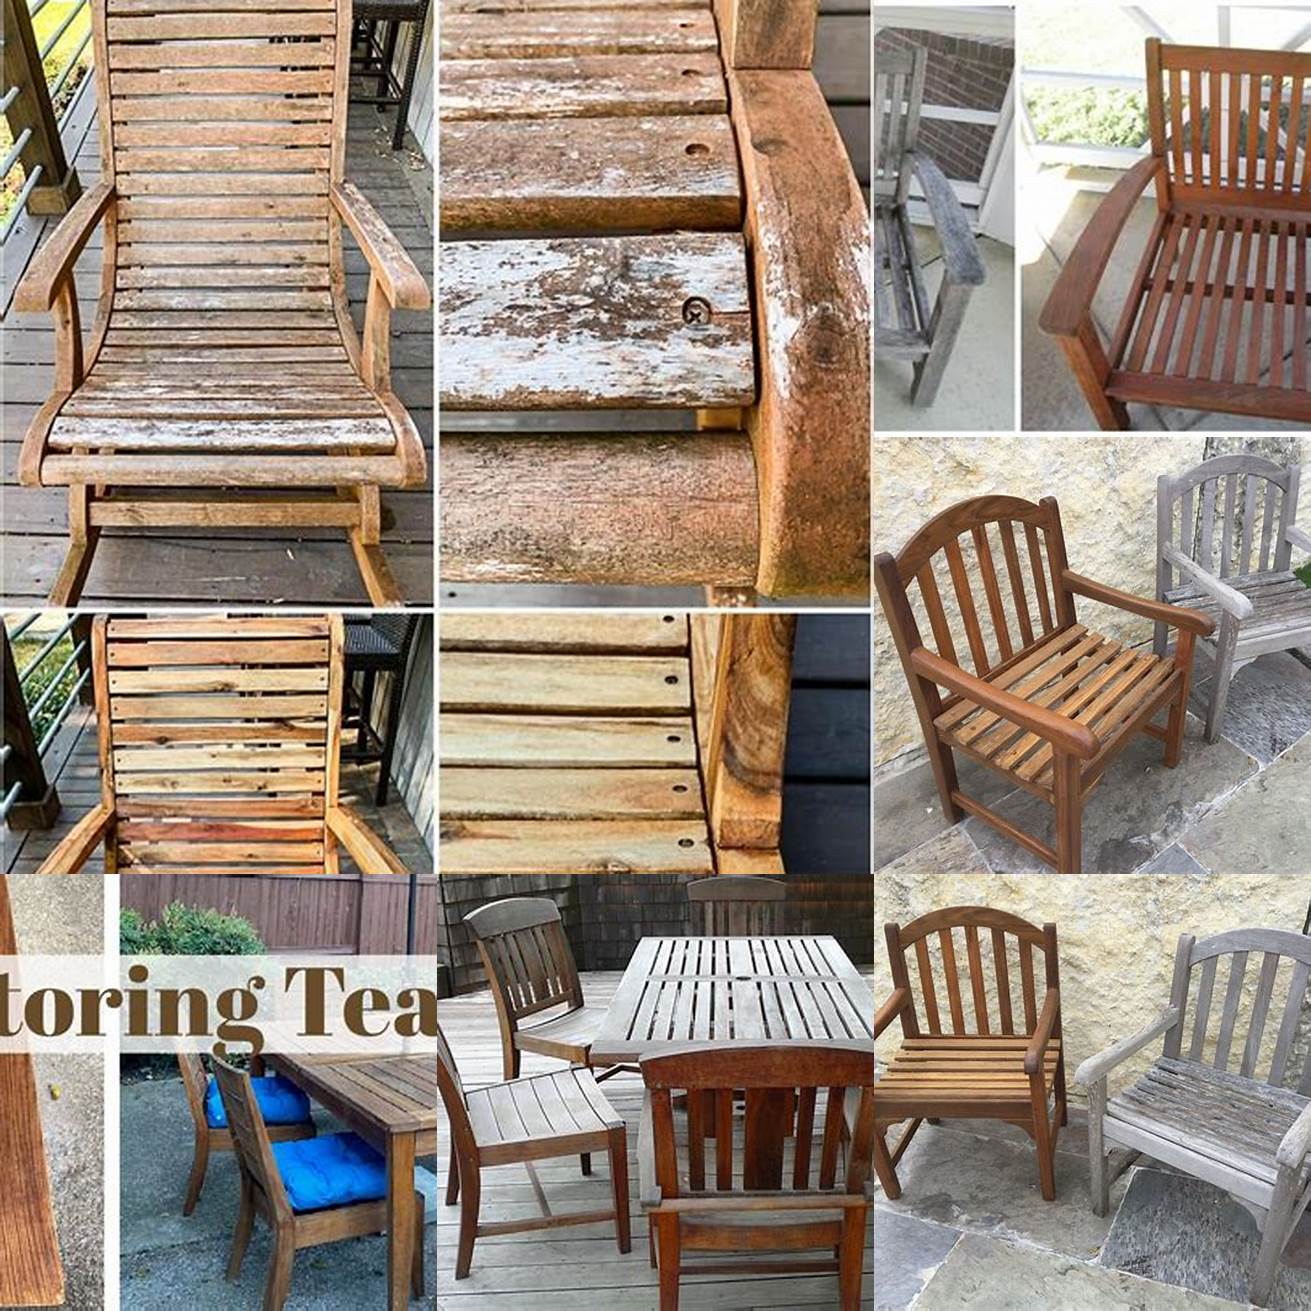 Before and after images of teak furniture